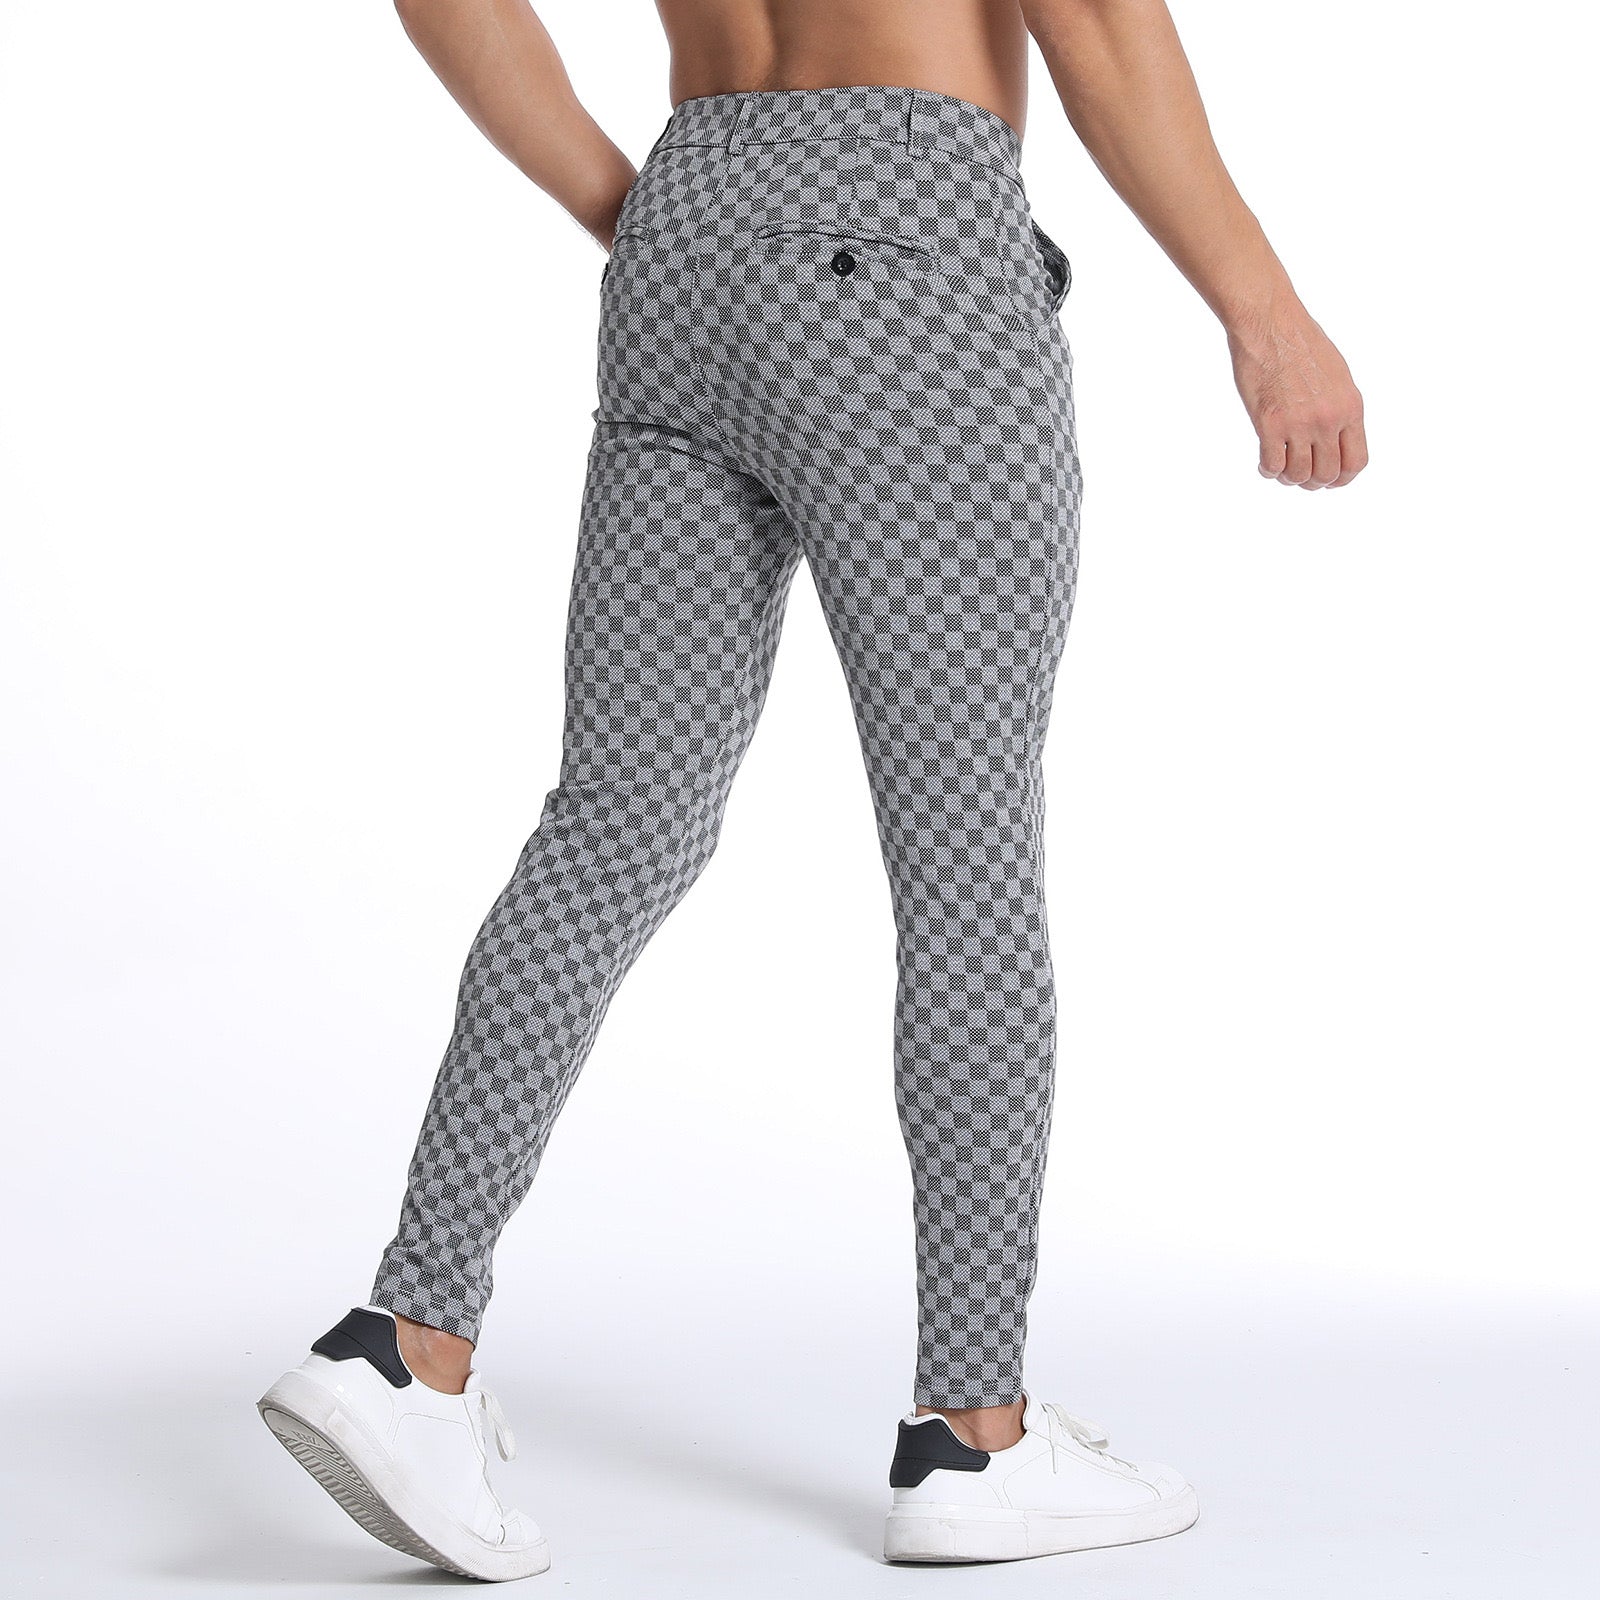 DVUI - Pants for Men - Sarman Fashion - Wholesale Clothing Fashion Brand for Men from Canada